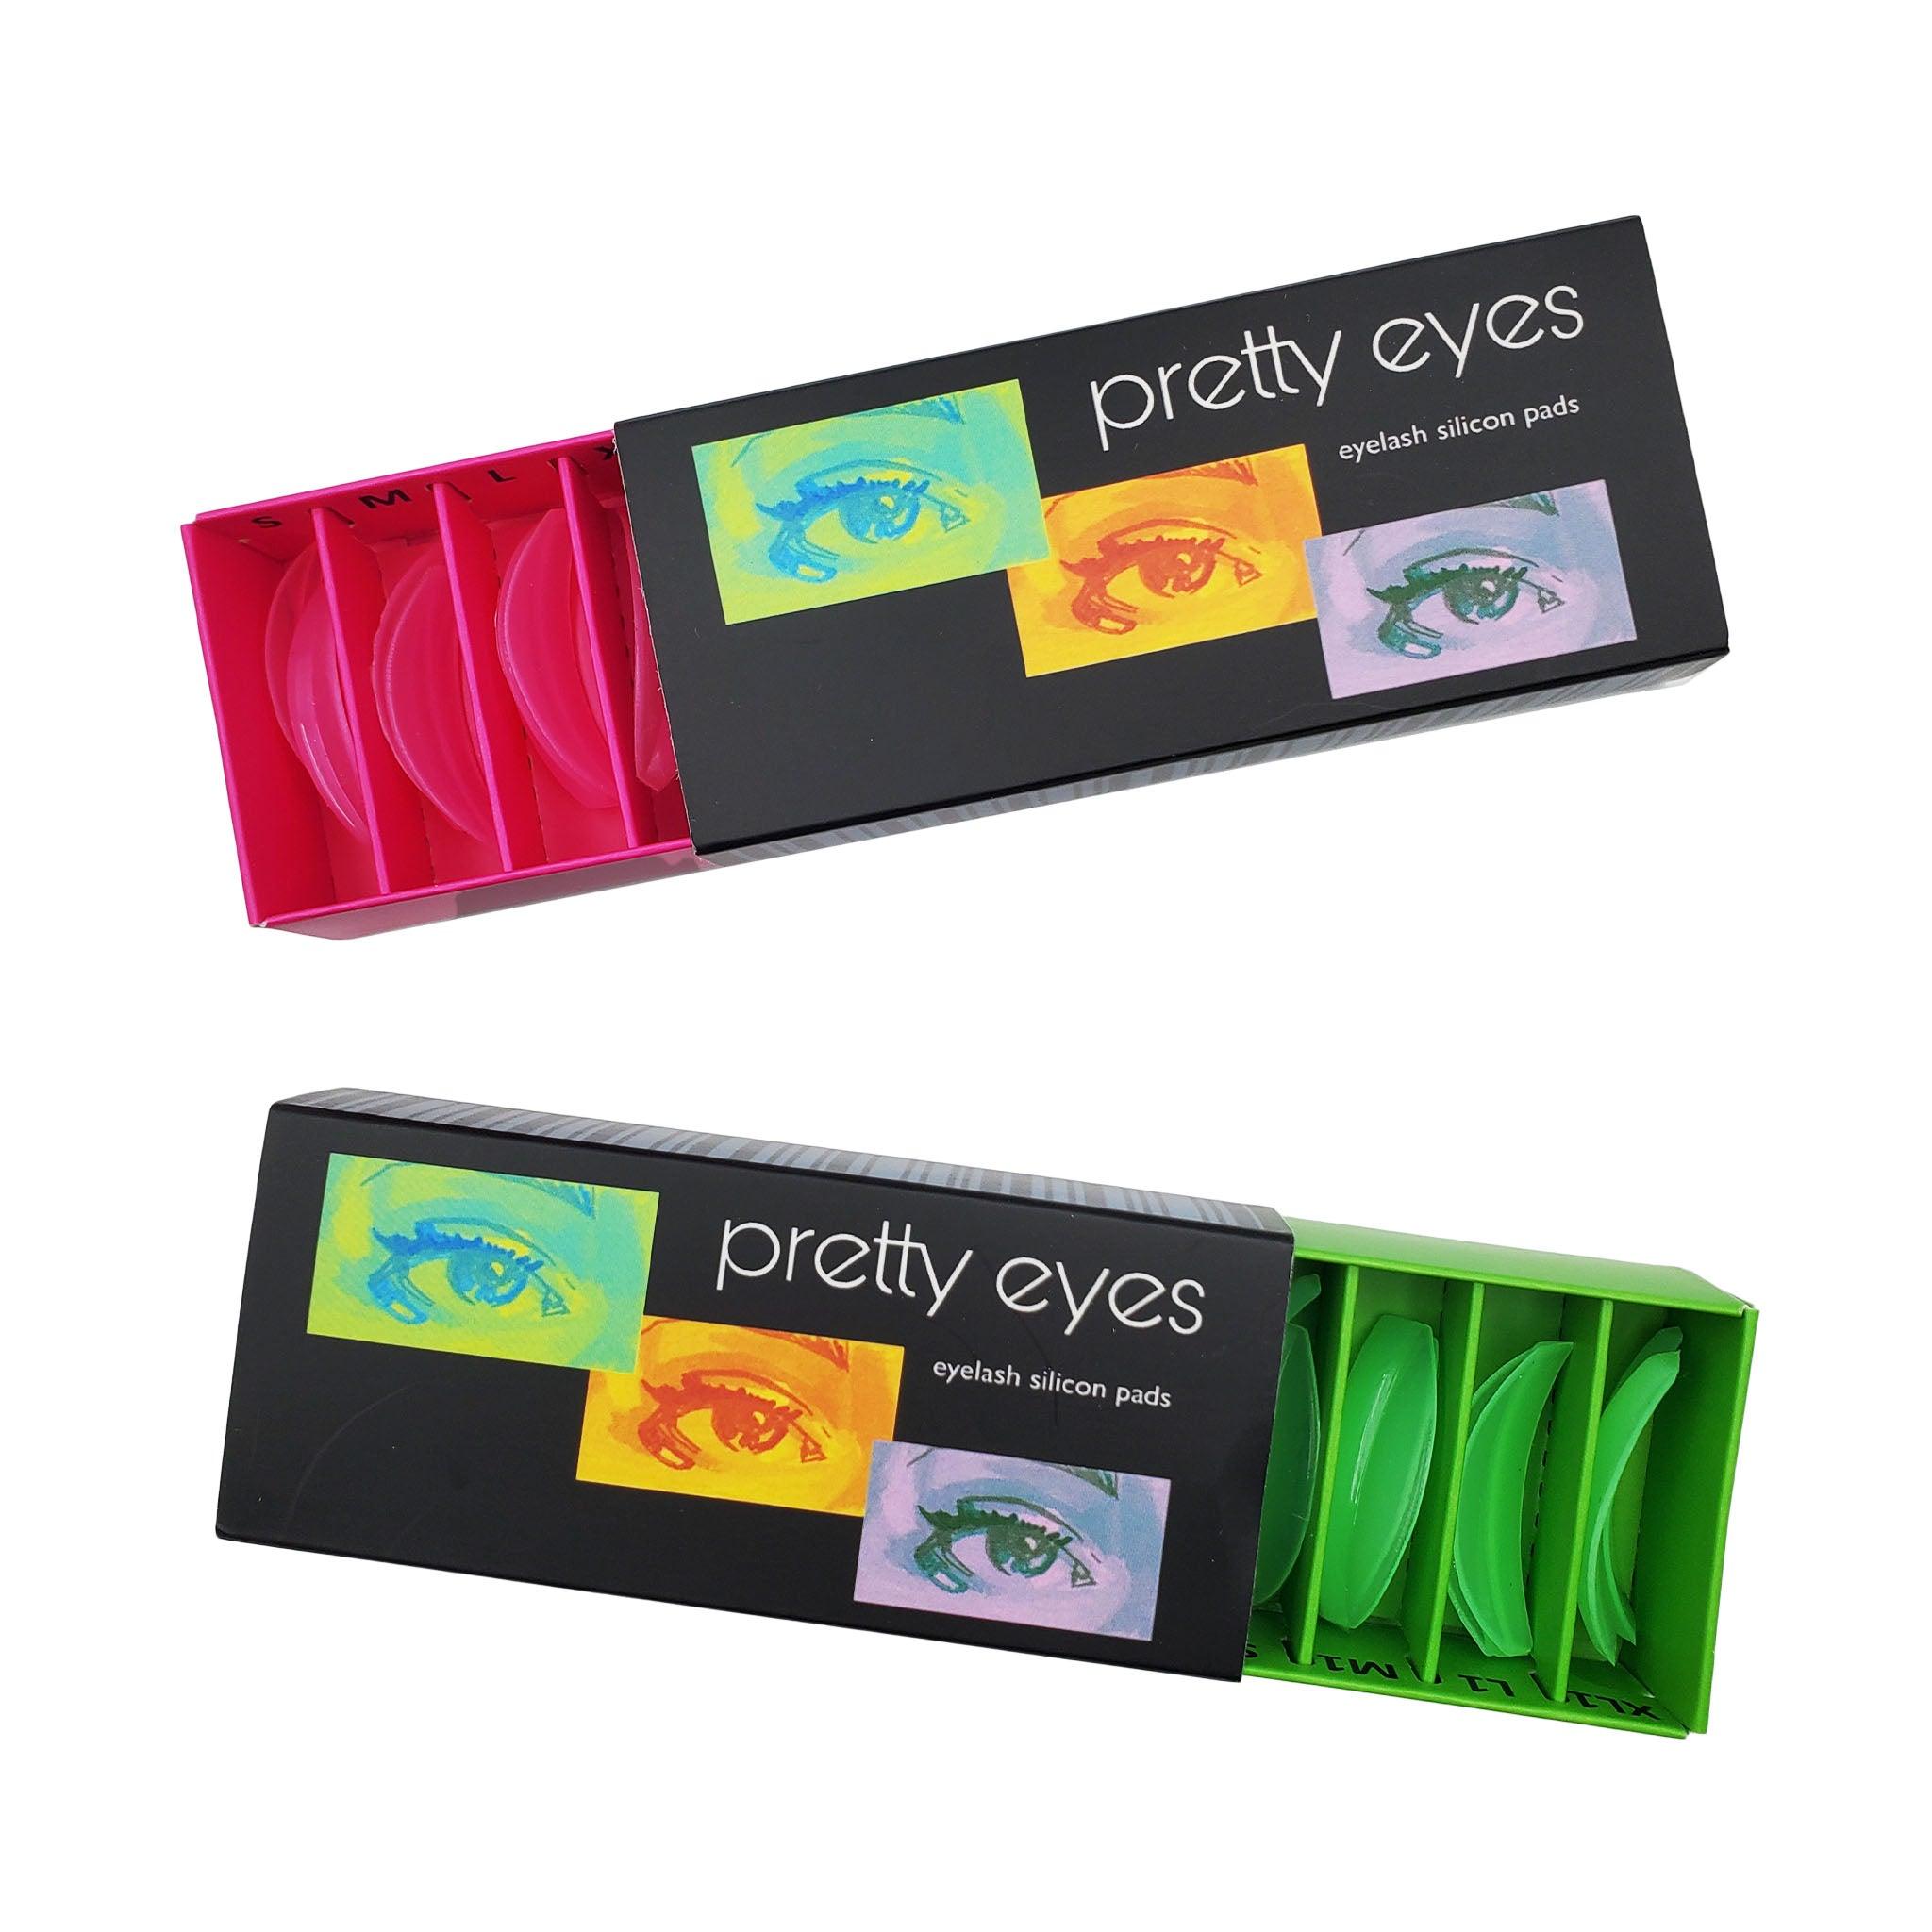 Pretty Eyes Lash Lift Shieds Pads for lamination 2 boxes pink and green open 